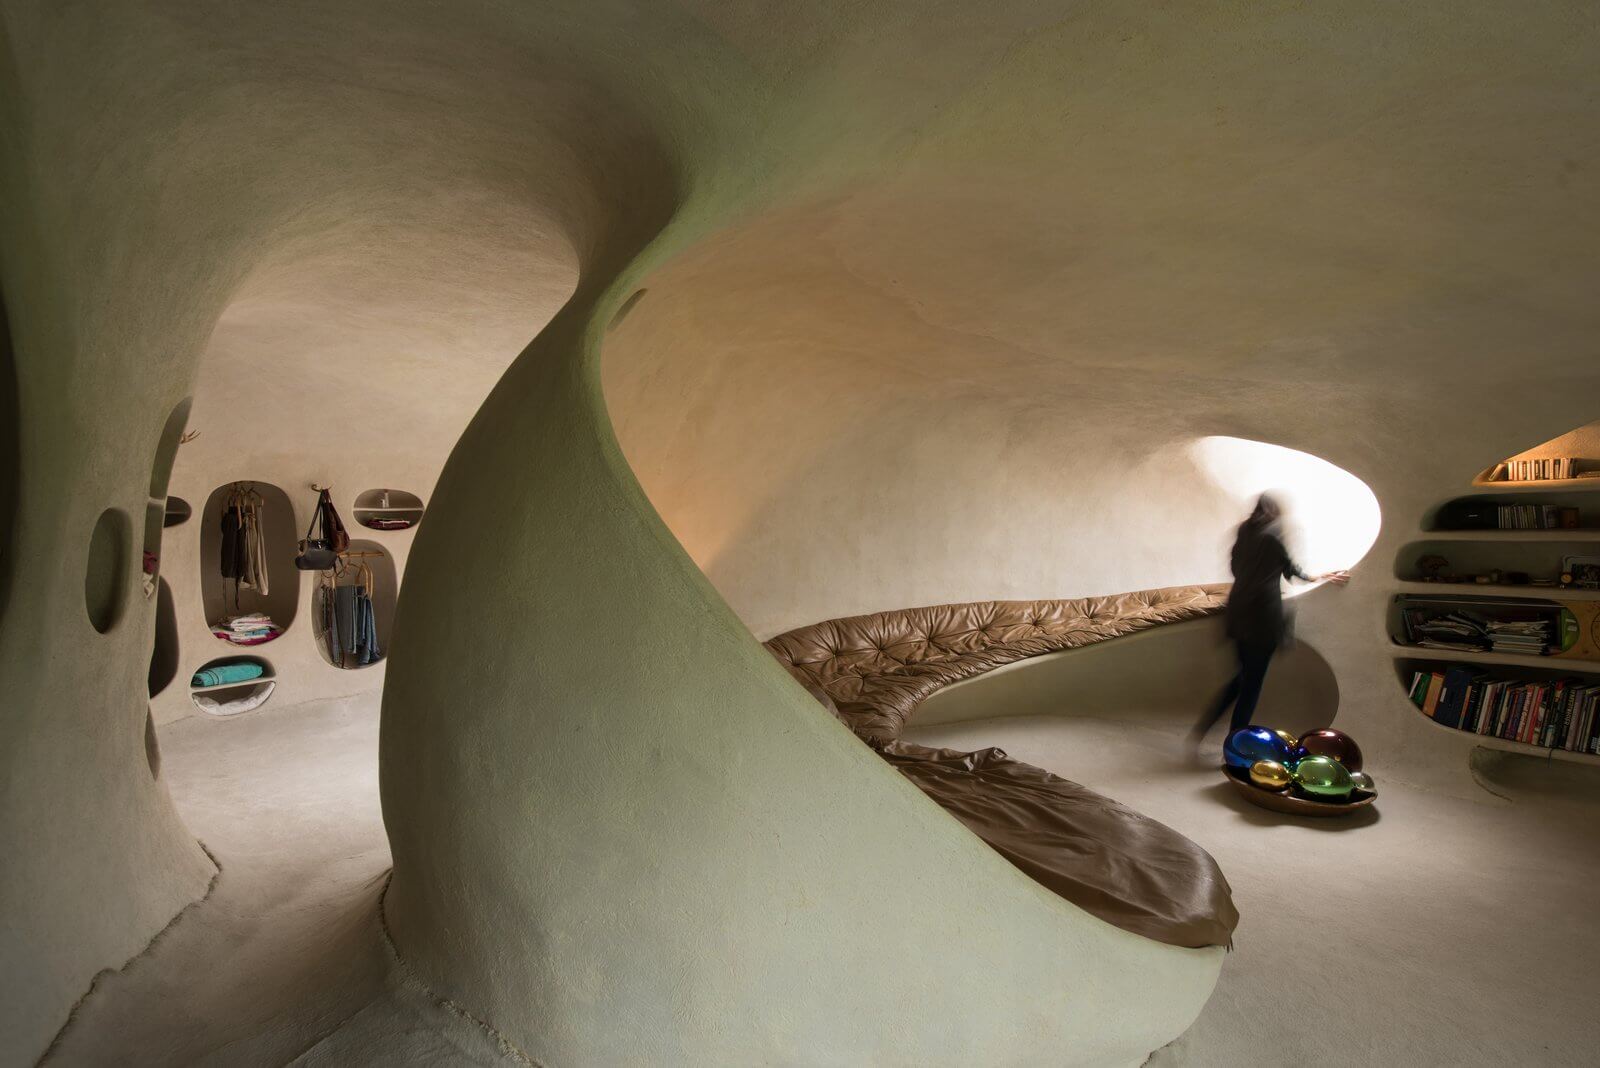 Mesmerizing Pictures Of An Underground Hobbit Style House